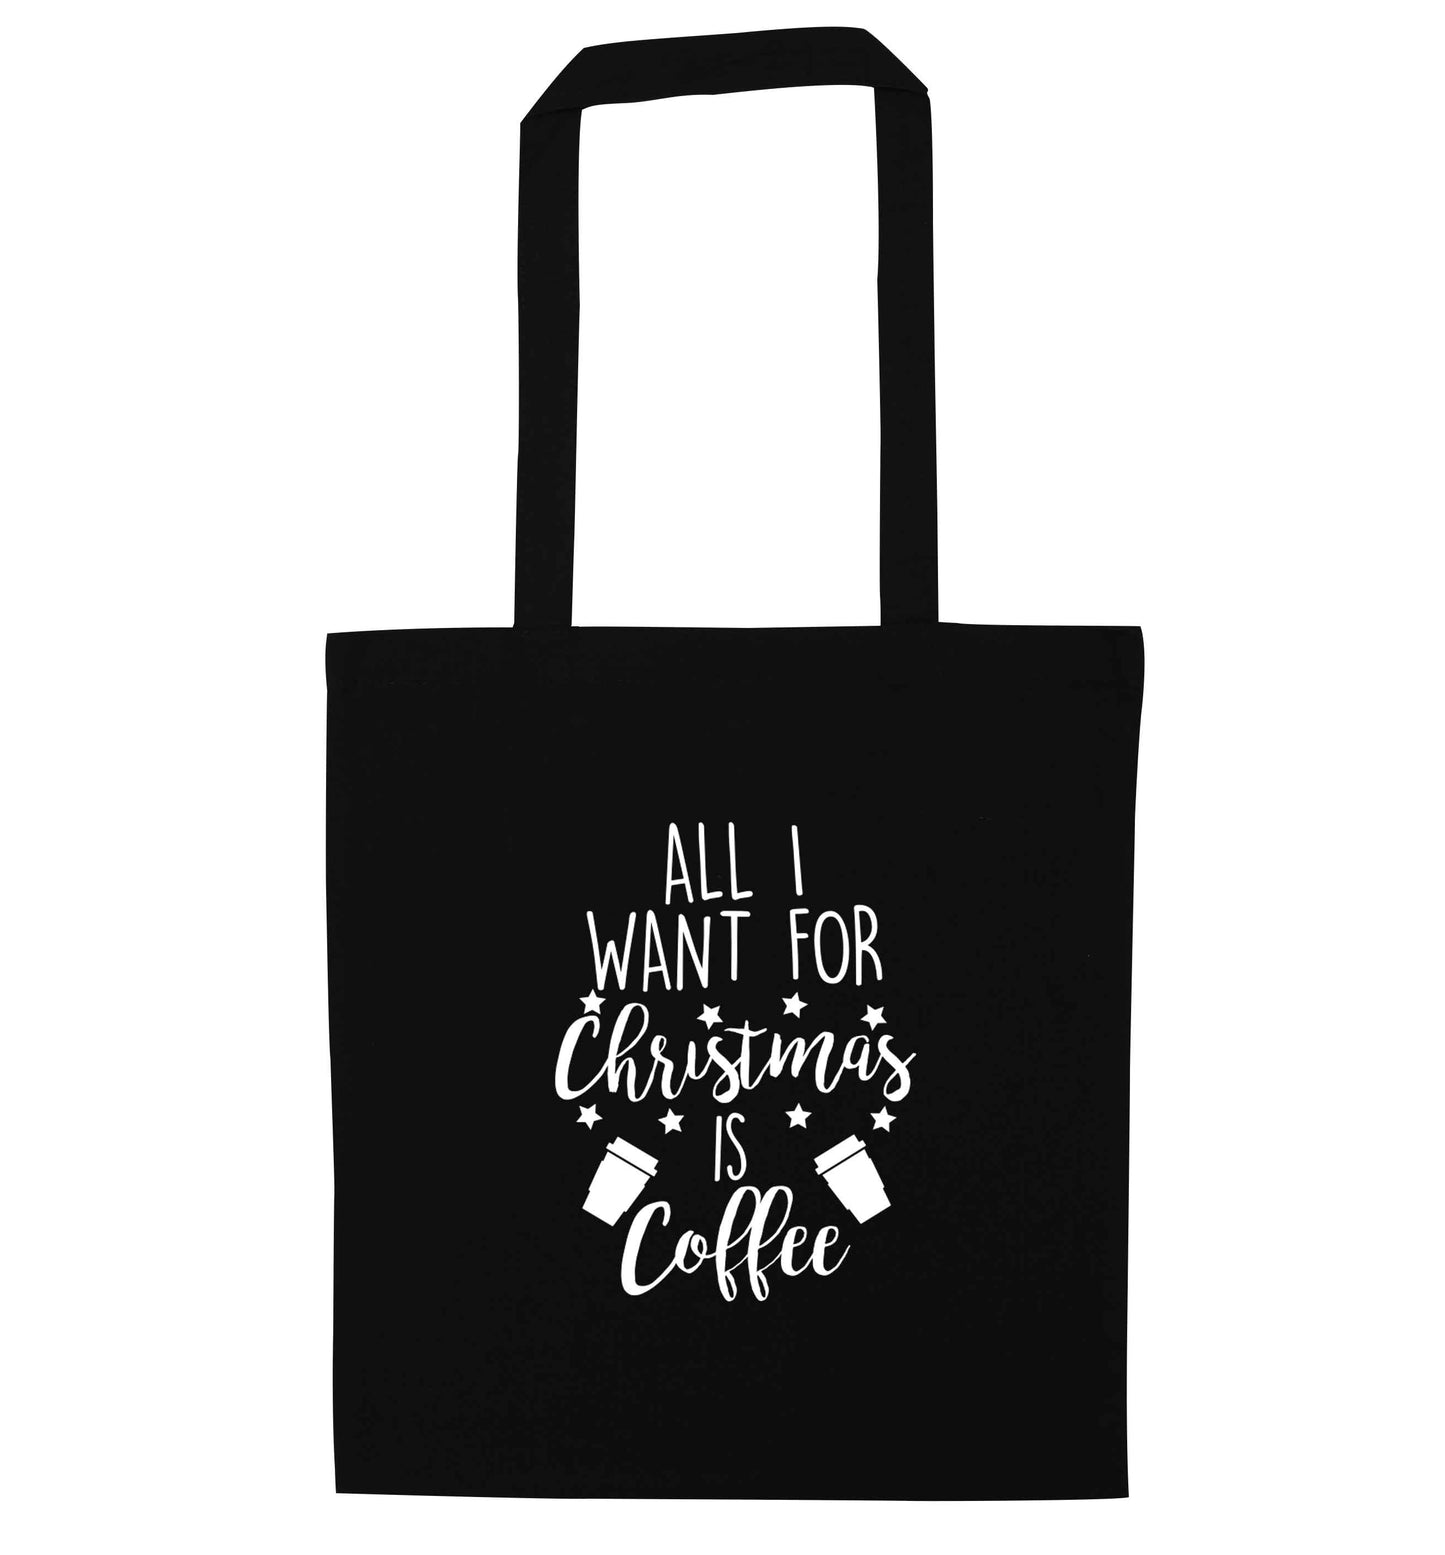 All I want for Christmas is coffee black tote bag